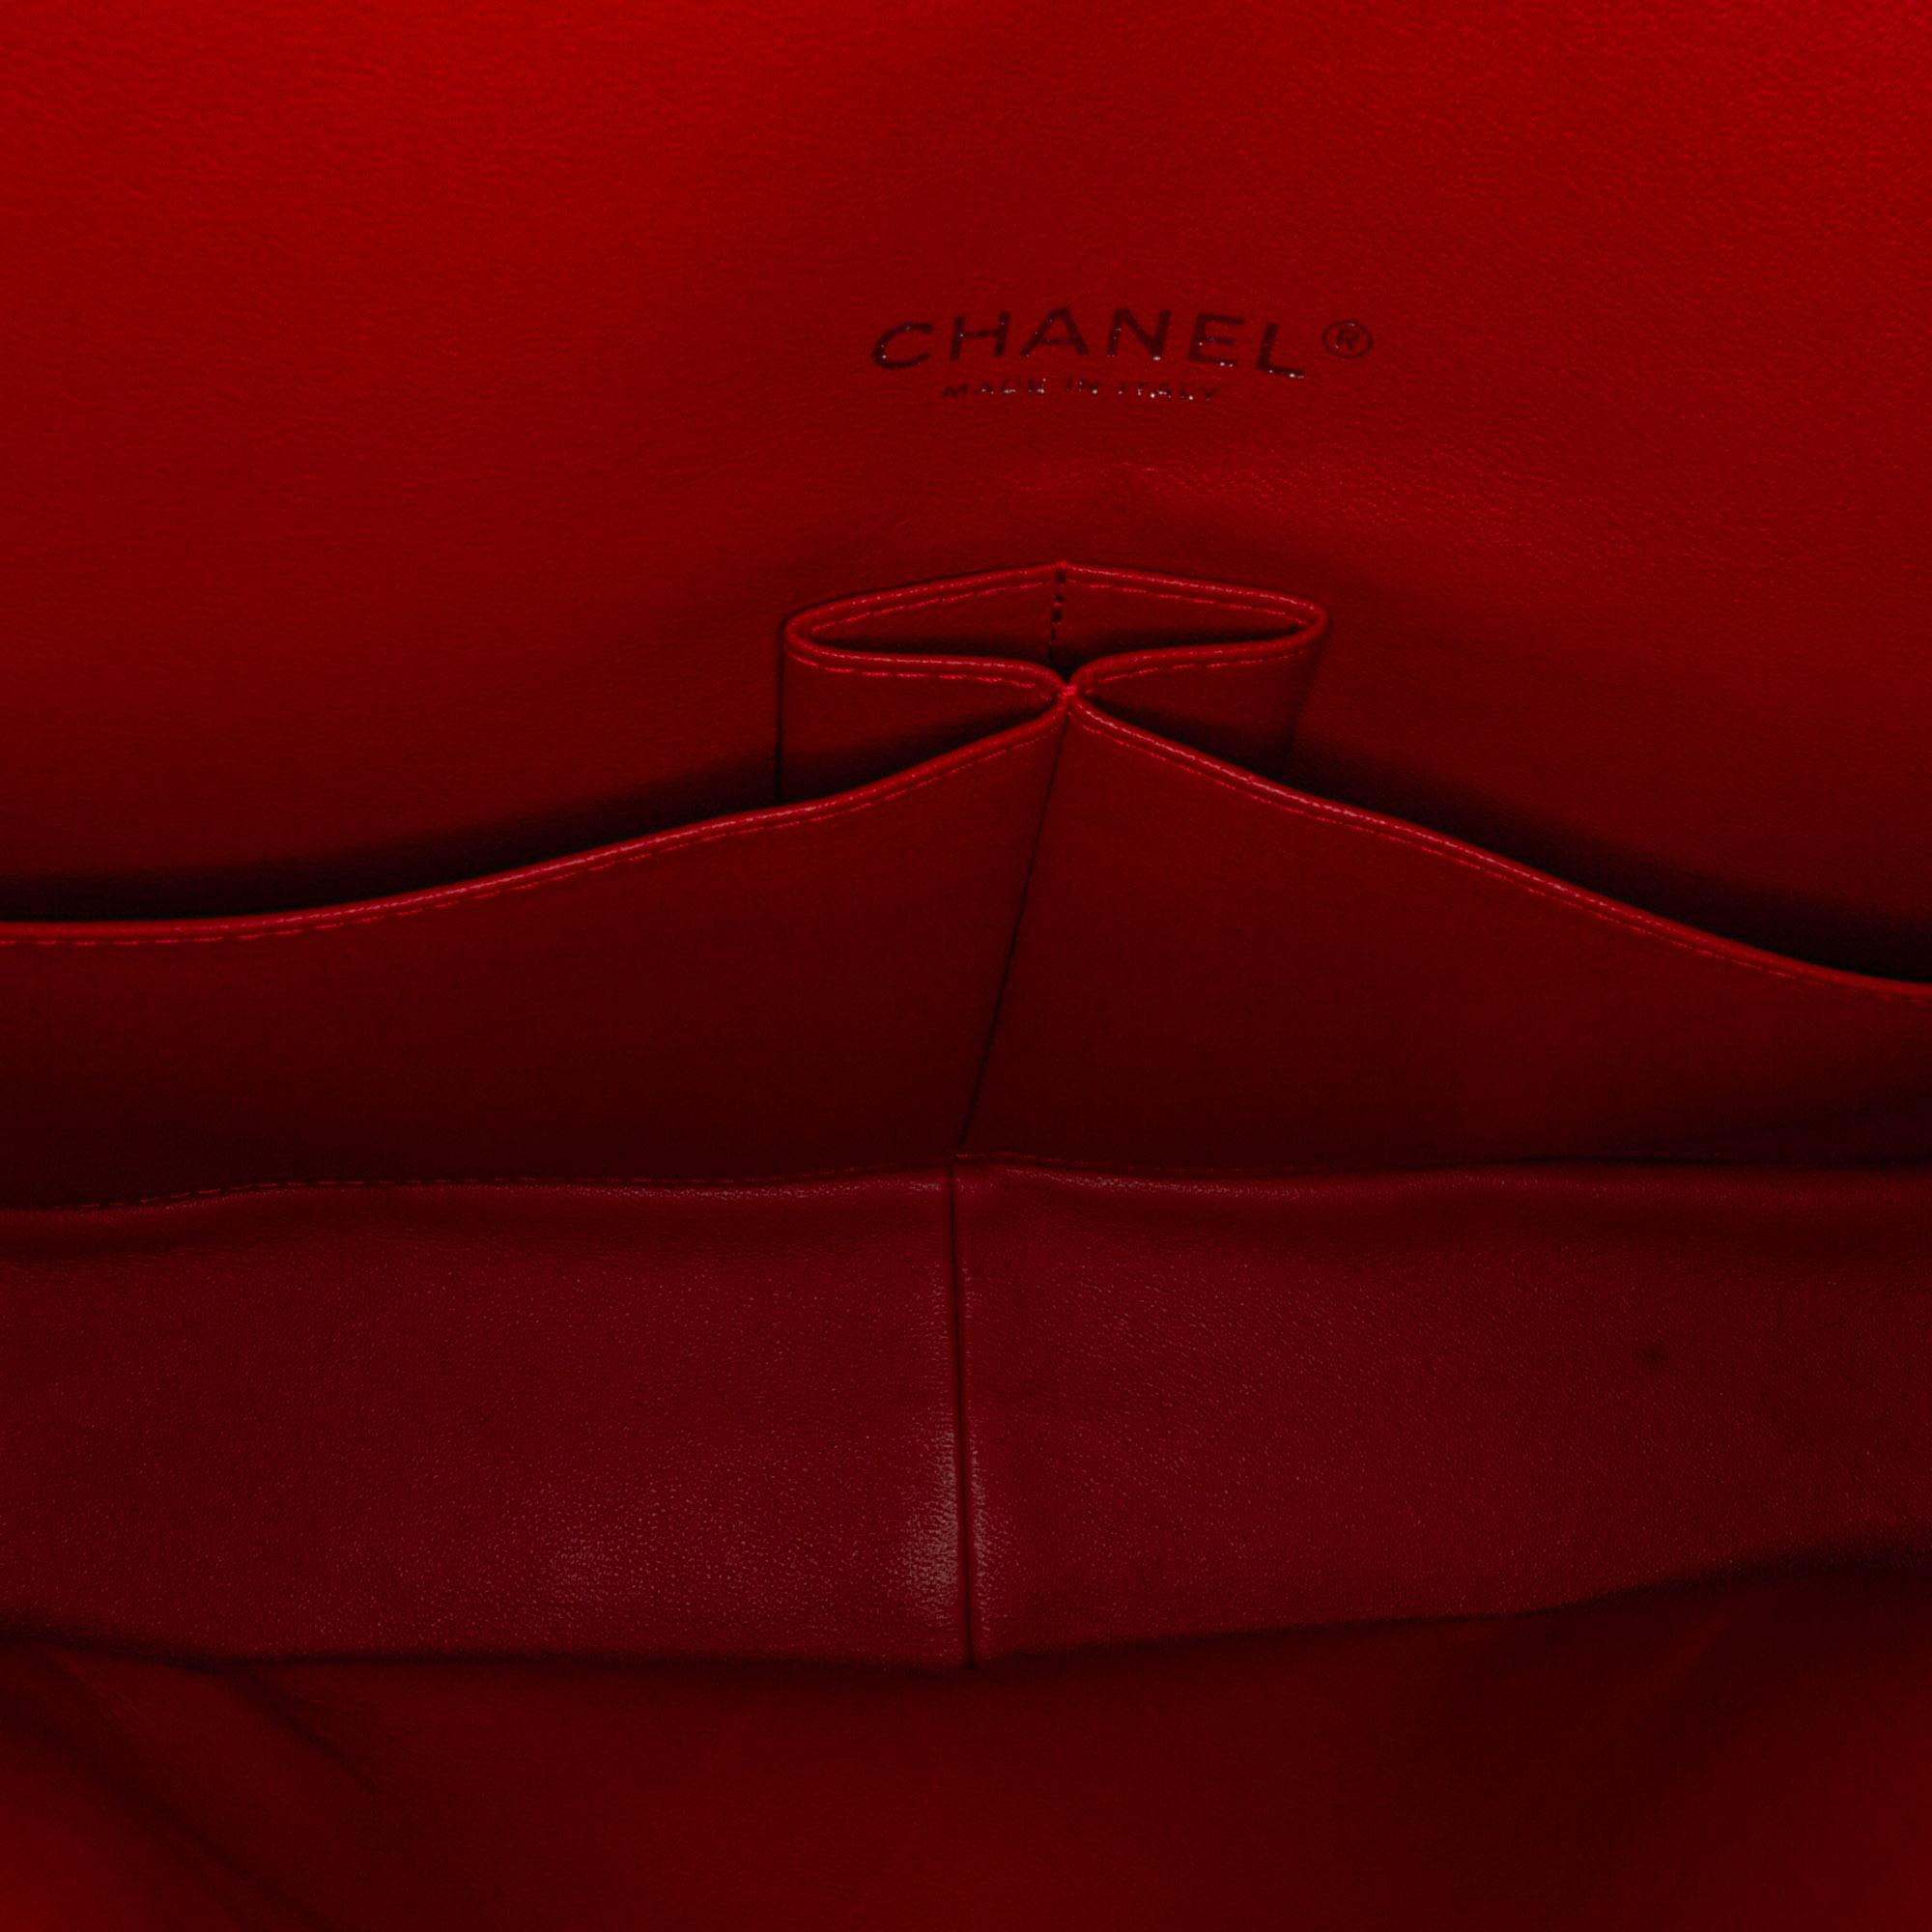 Chanel Red Maxi Classic Lambskin Double Flap